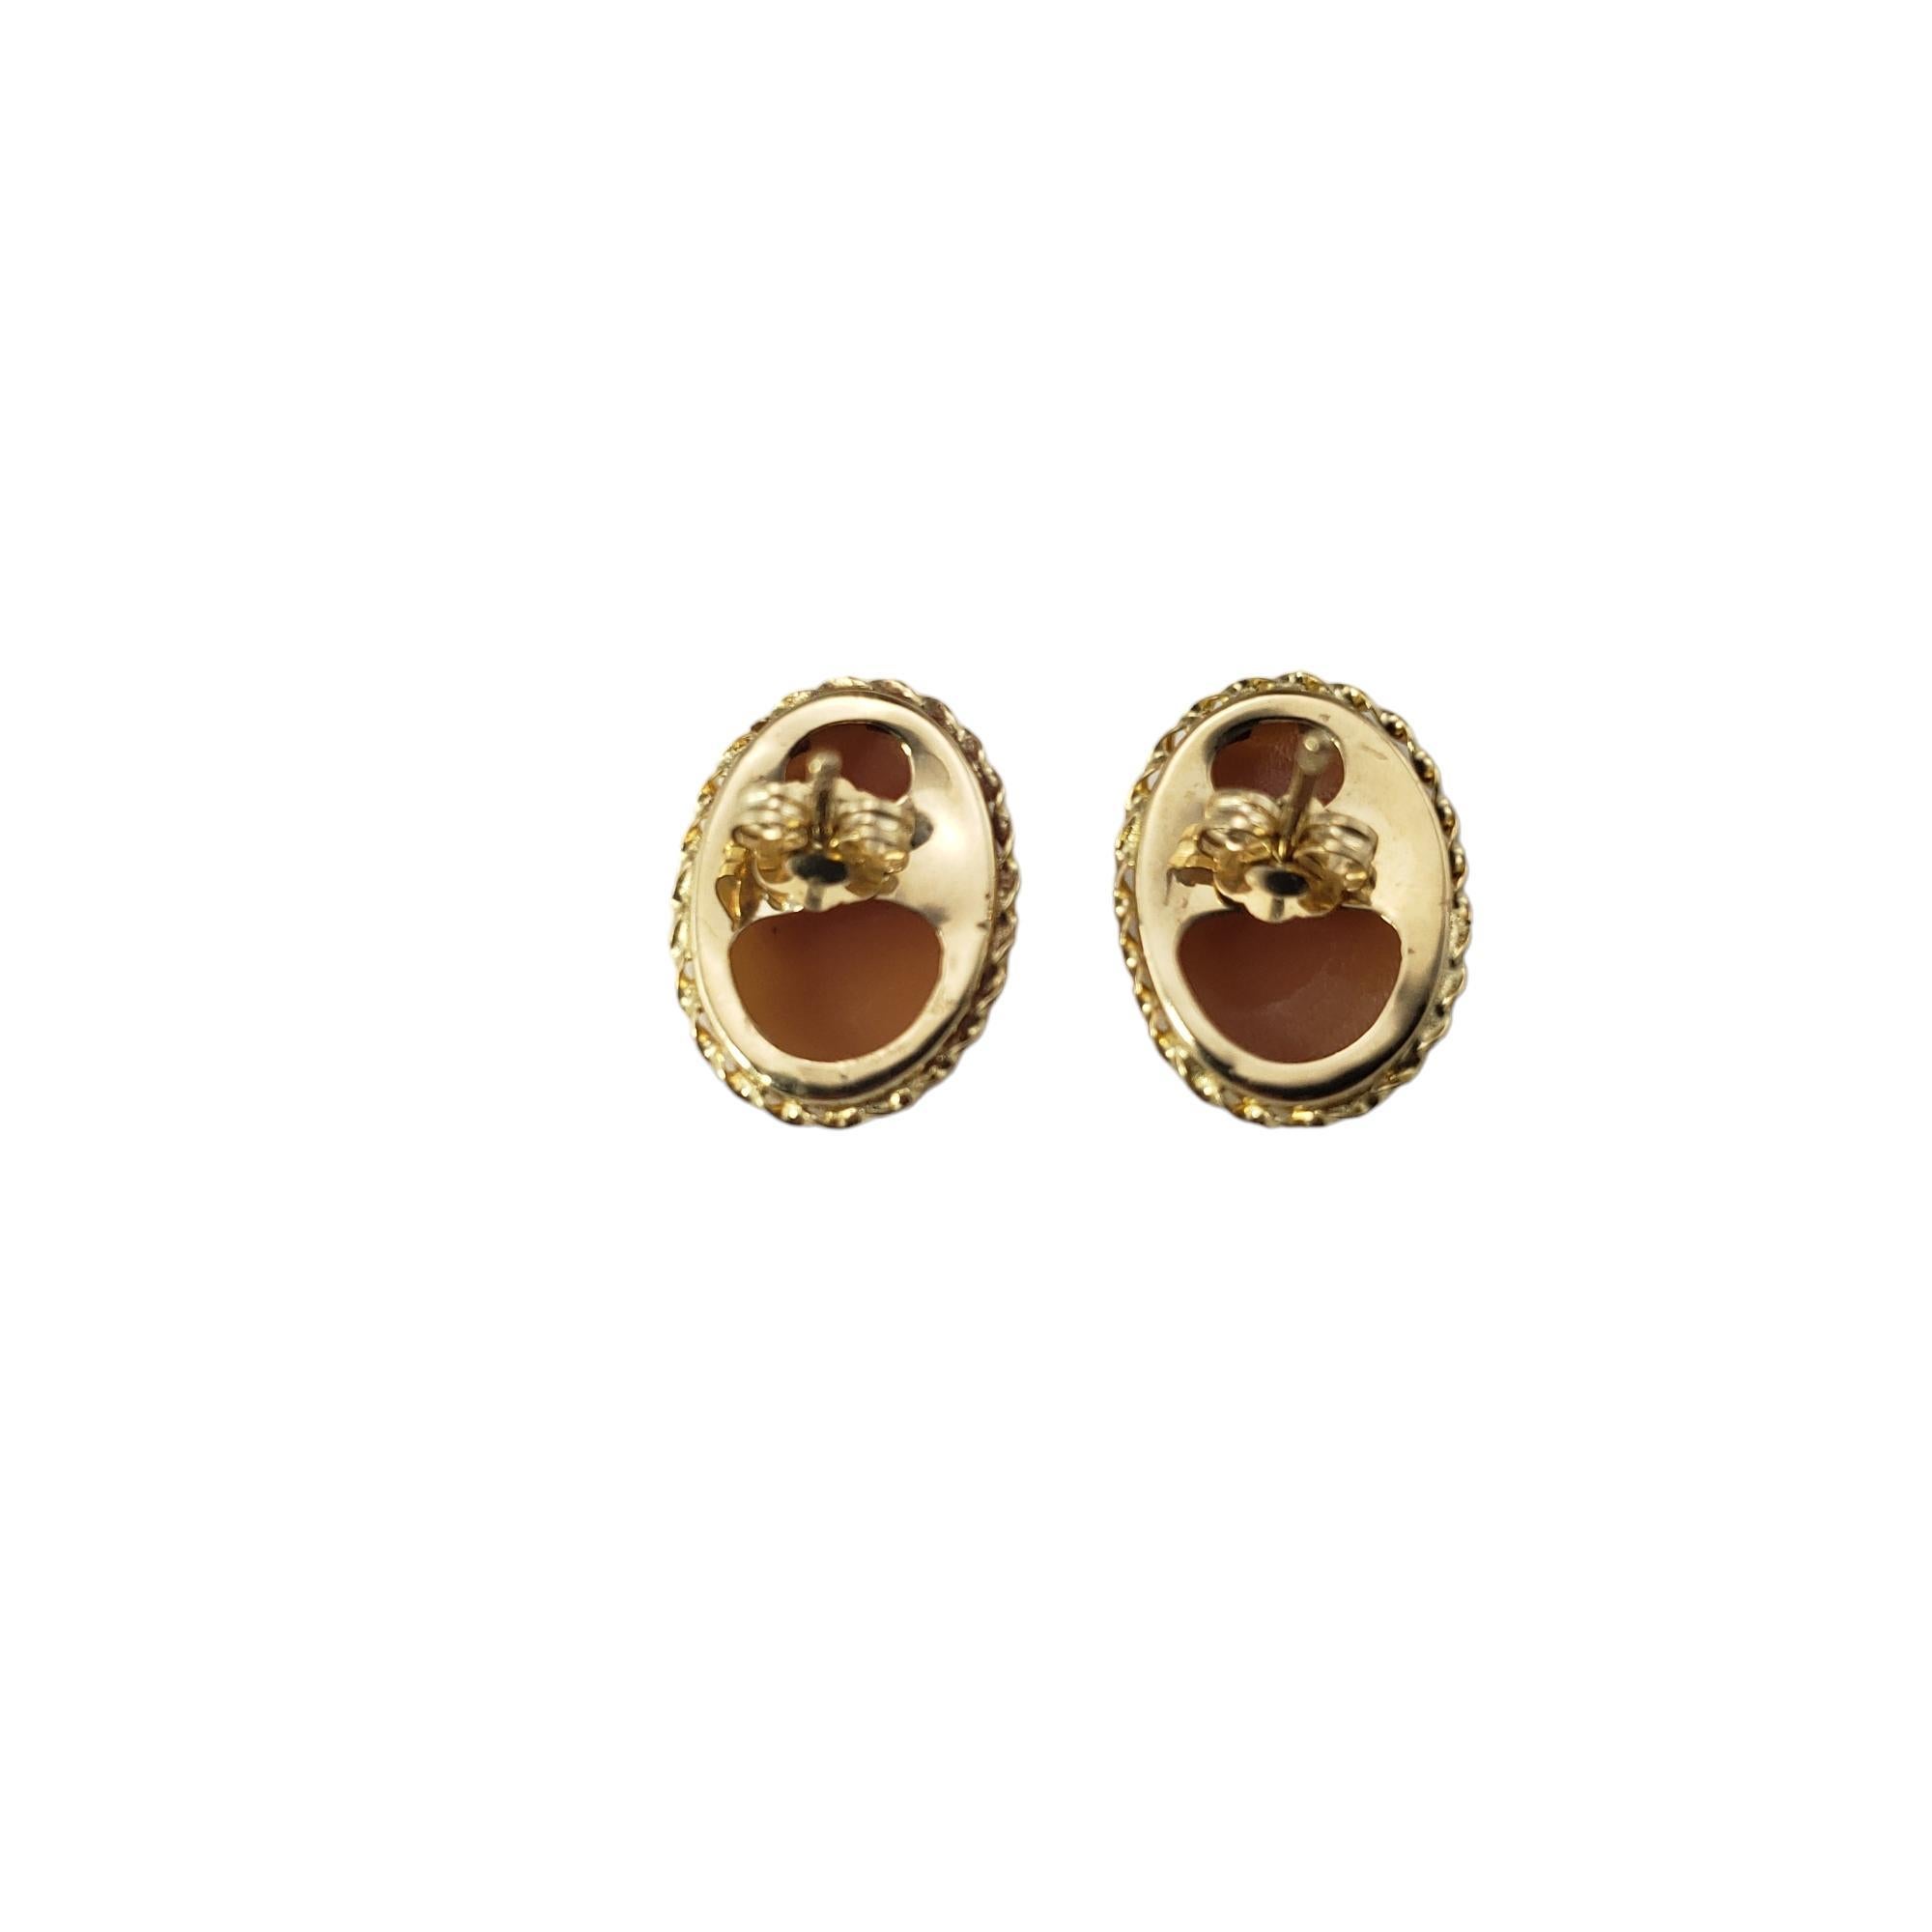  14 Karat Yellow Gold Cameo Earrings #15520 For Sale 1